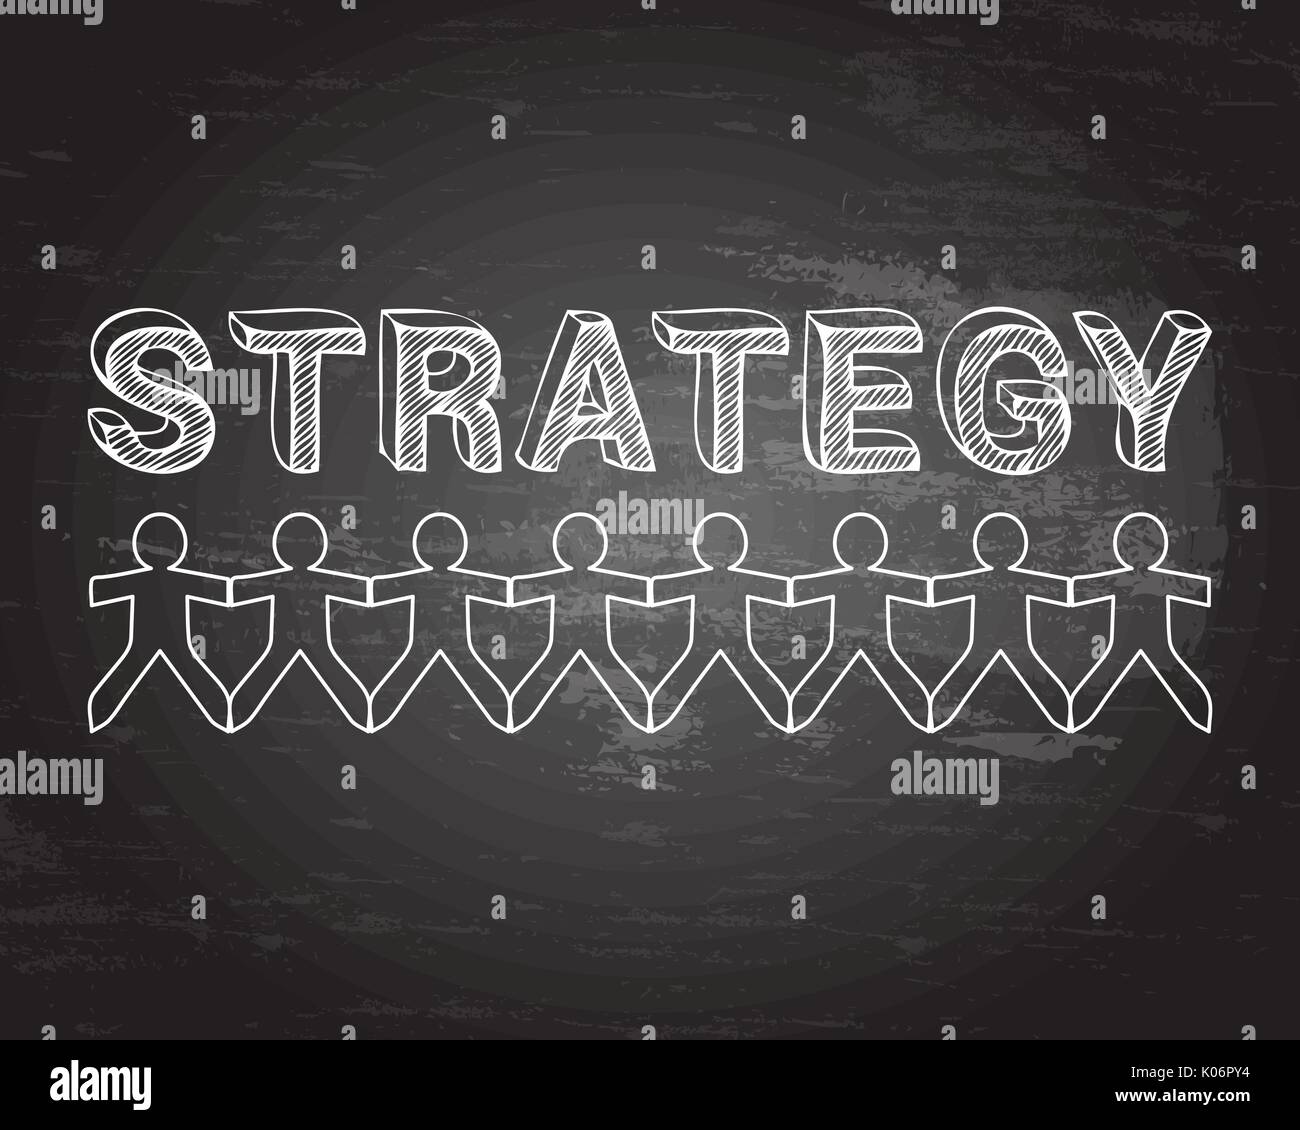 Strategy text hand drawn with paper people on blackboard background Stock Vector